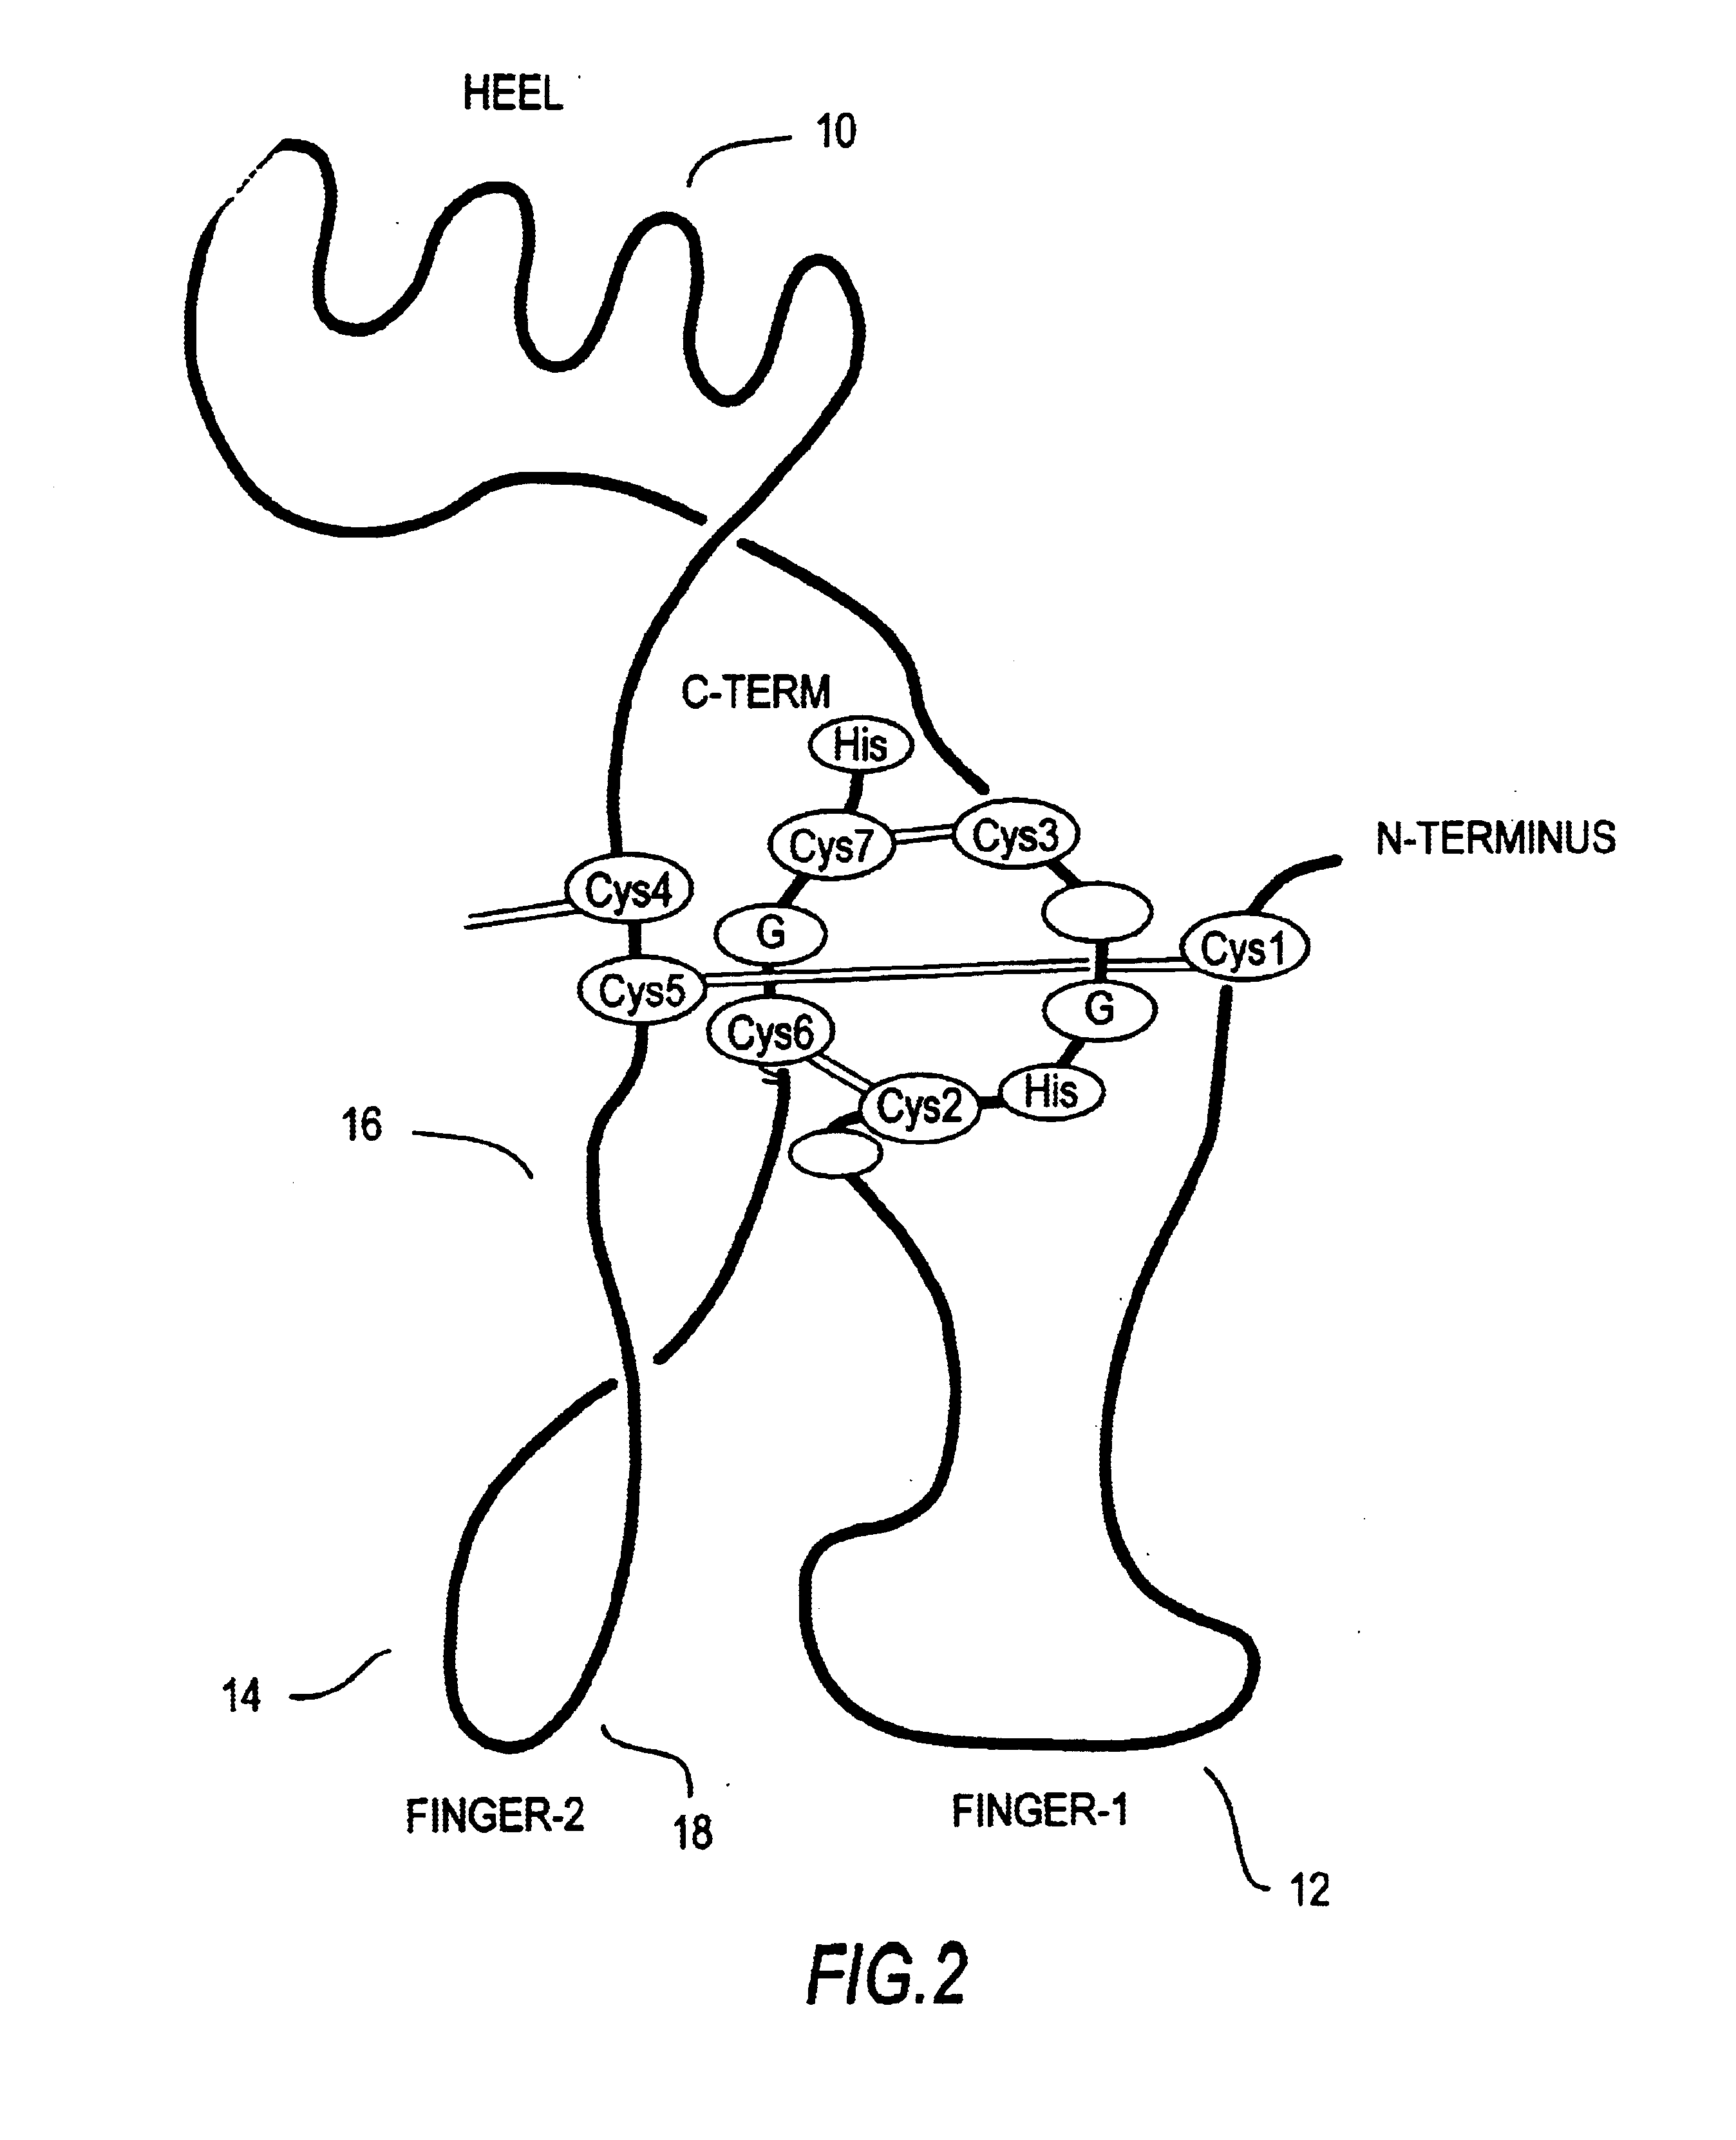 Modified proteins of the TGF-β superfamily, including morphogenic proteins